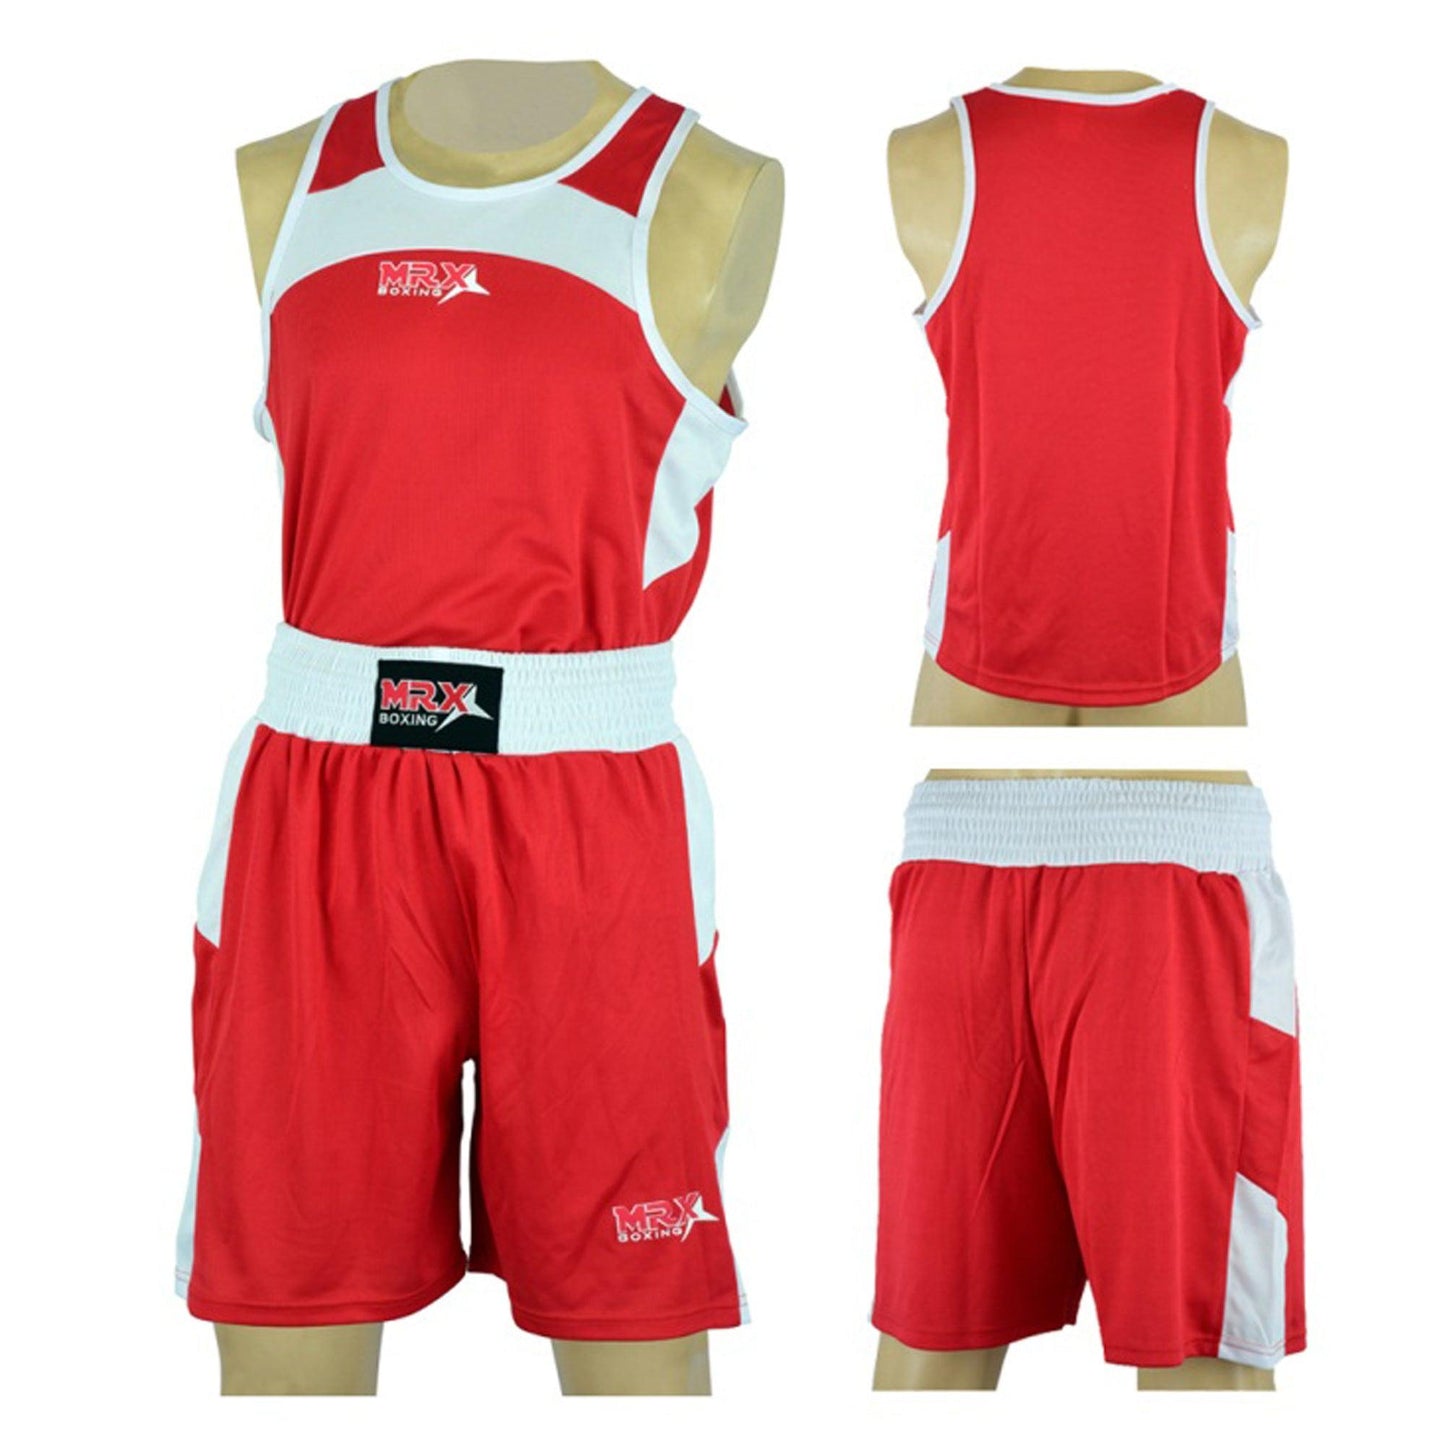 MRX Men's Boxing Uniform set for Training or Fighting Jersey & Shorts All Sizes